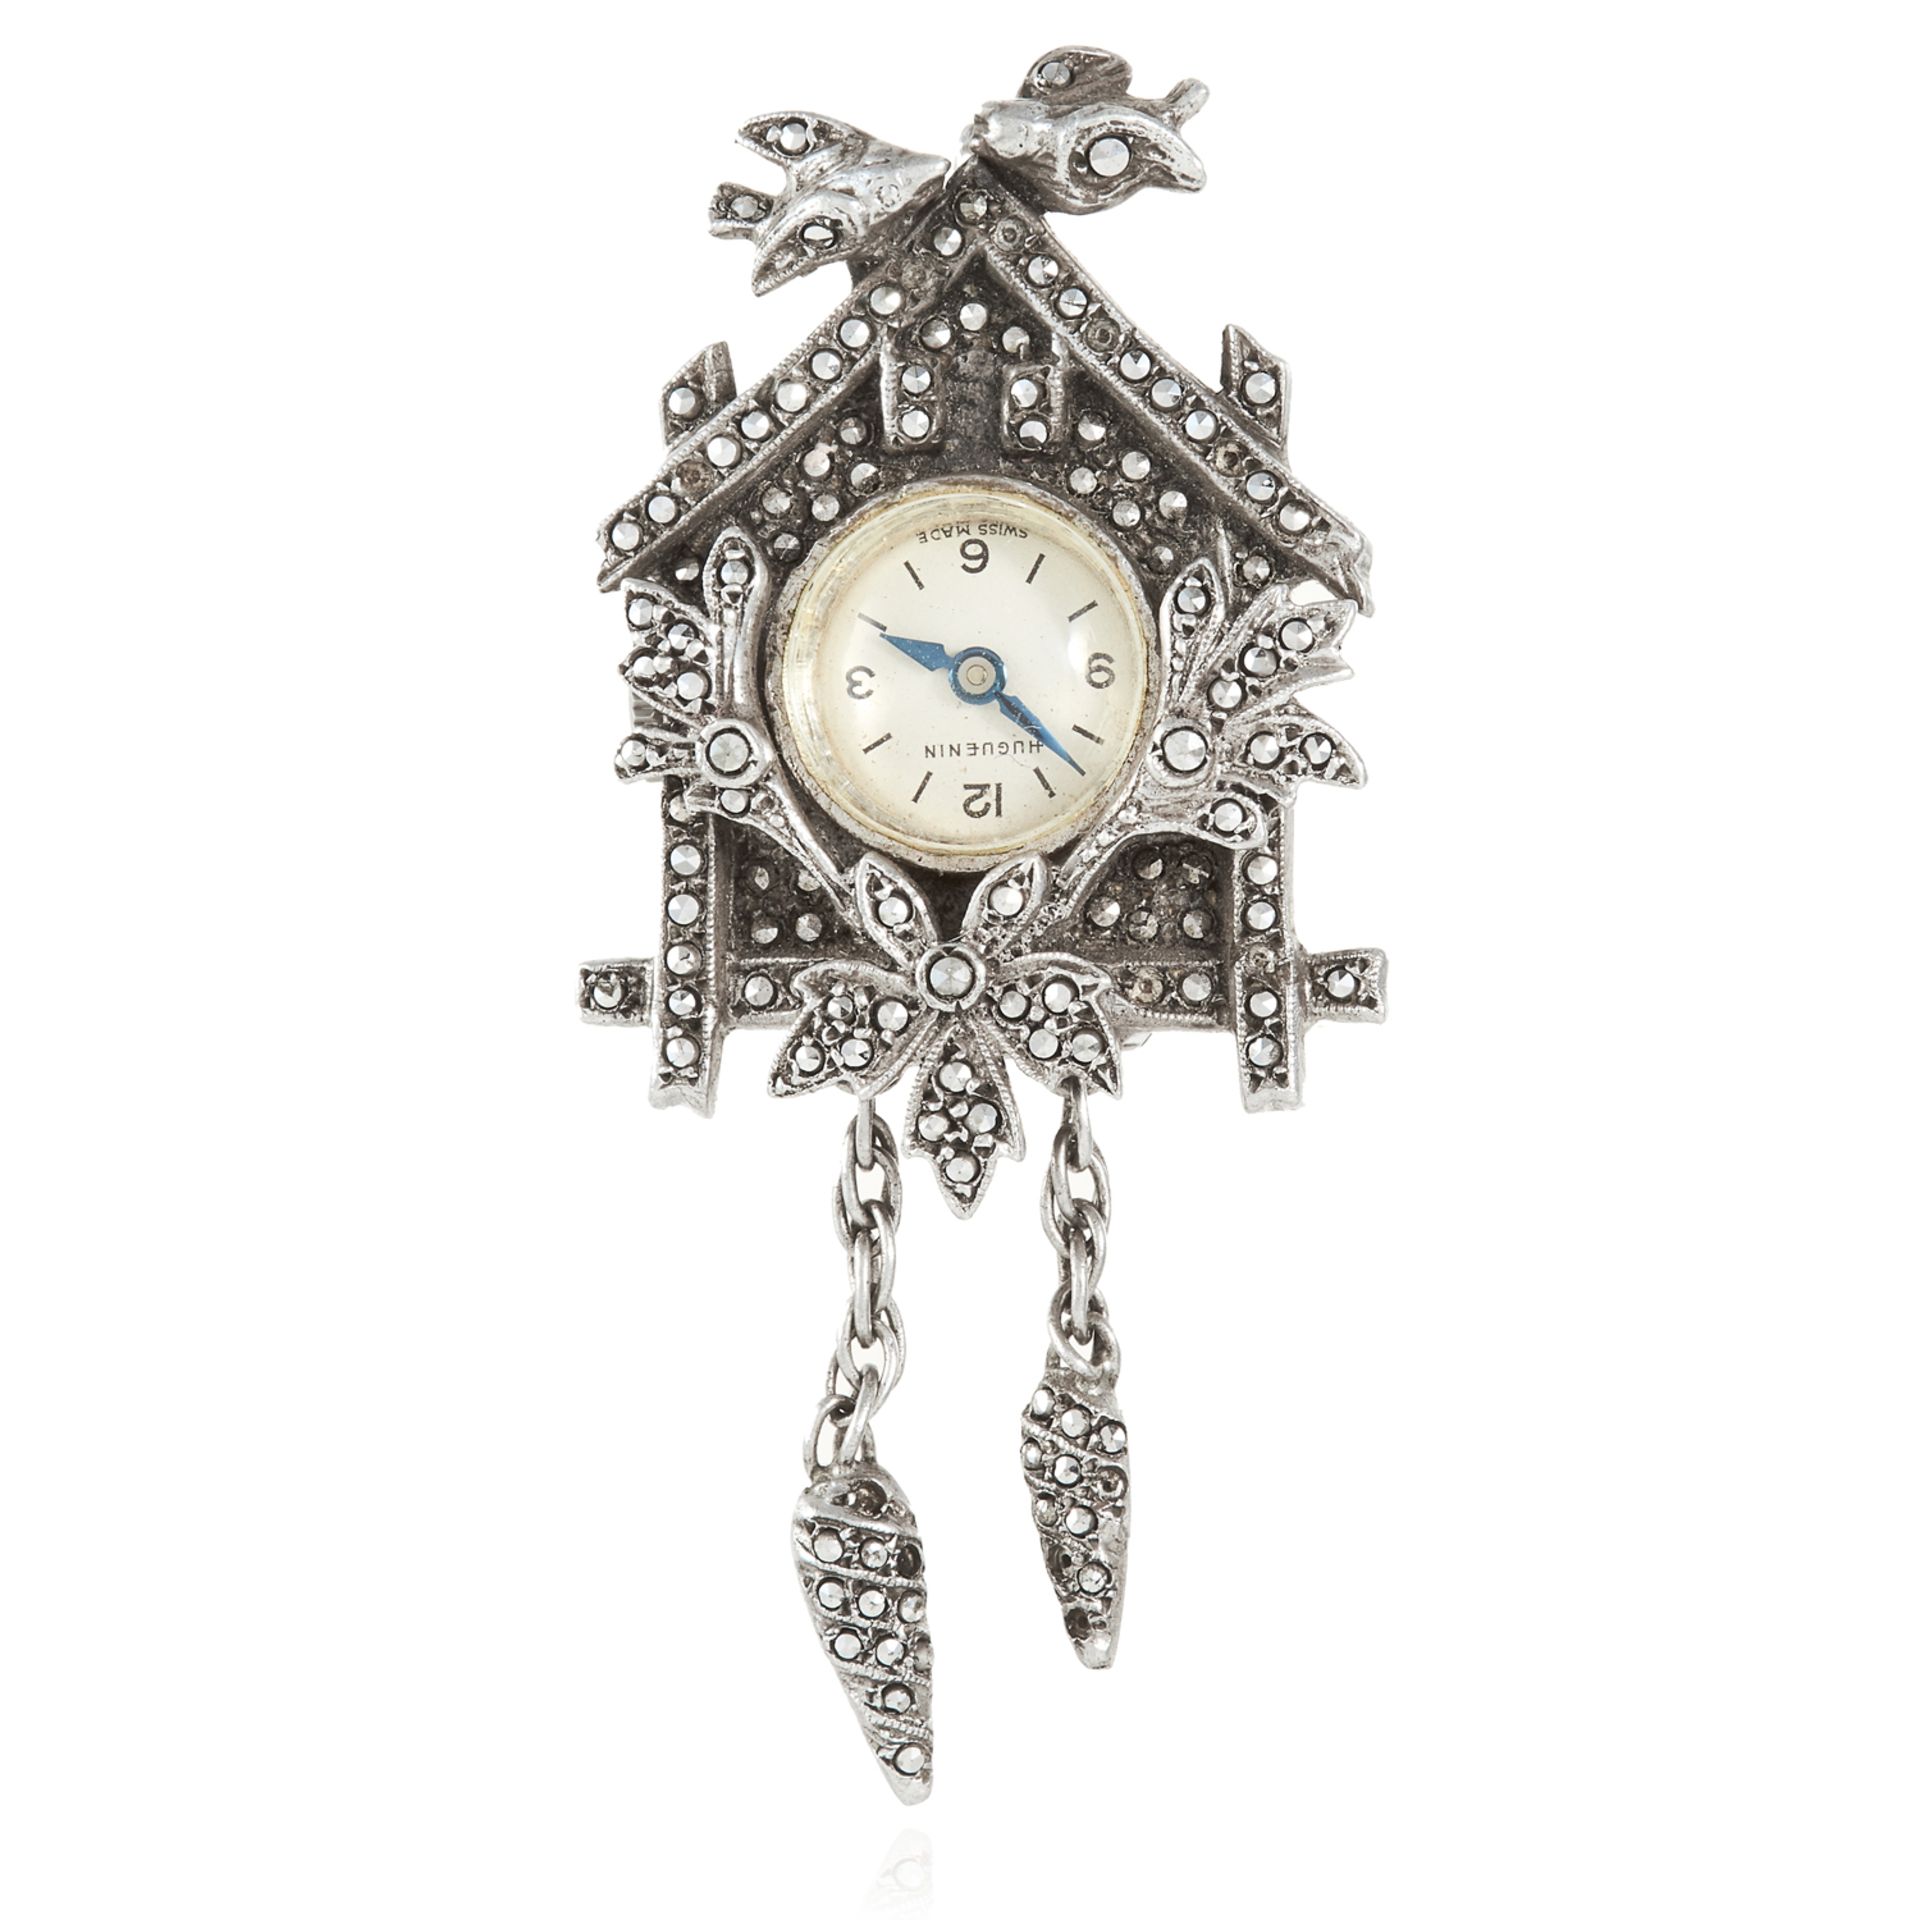 A MARCASITE CUCKOO CLOCK BROOCH, CIRCA 1920 in silver depicting a bird brooch jewelled with